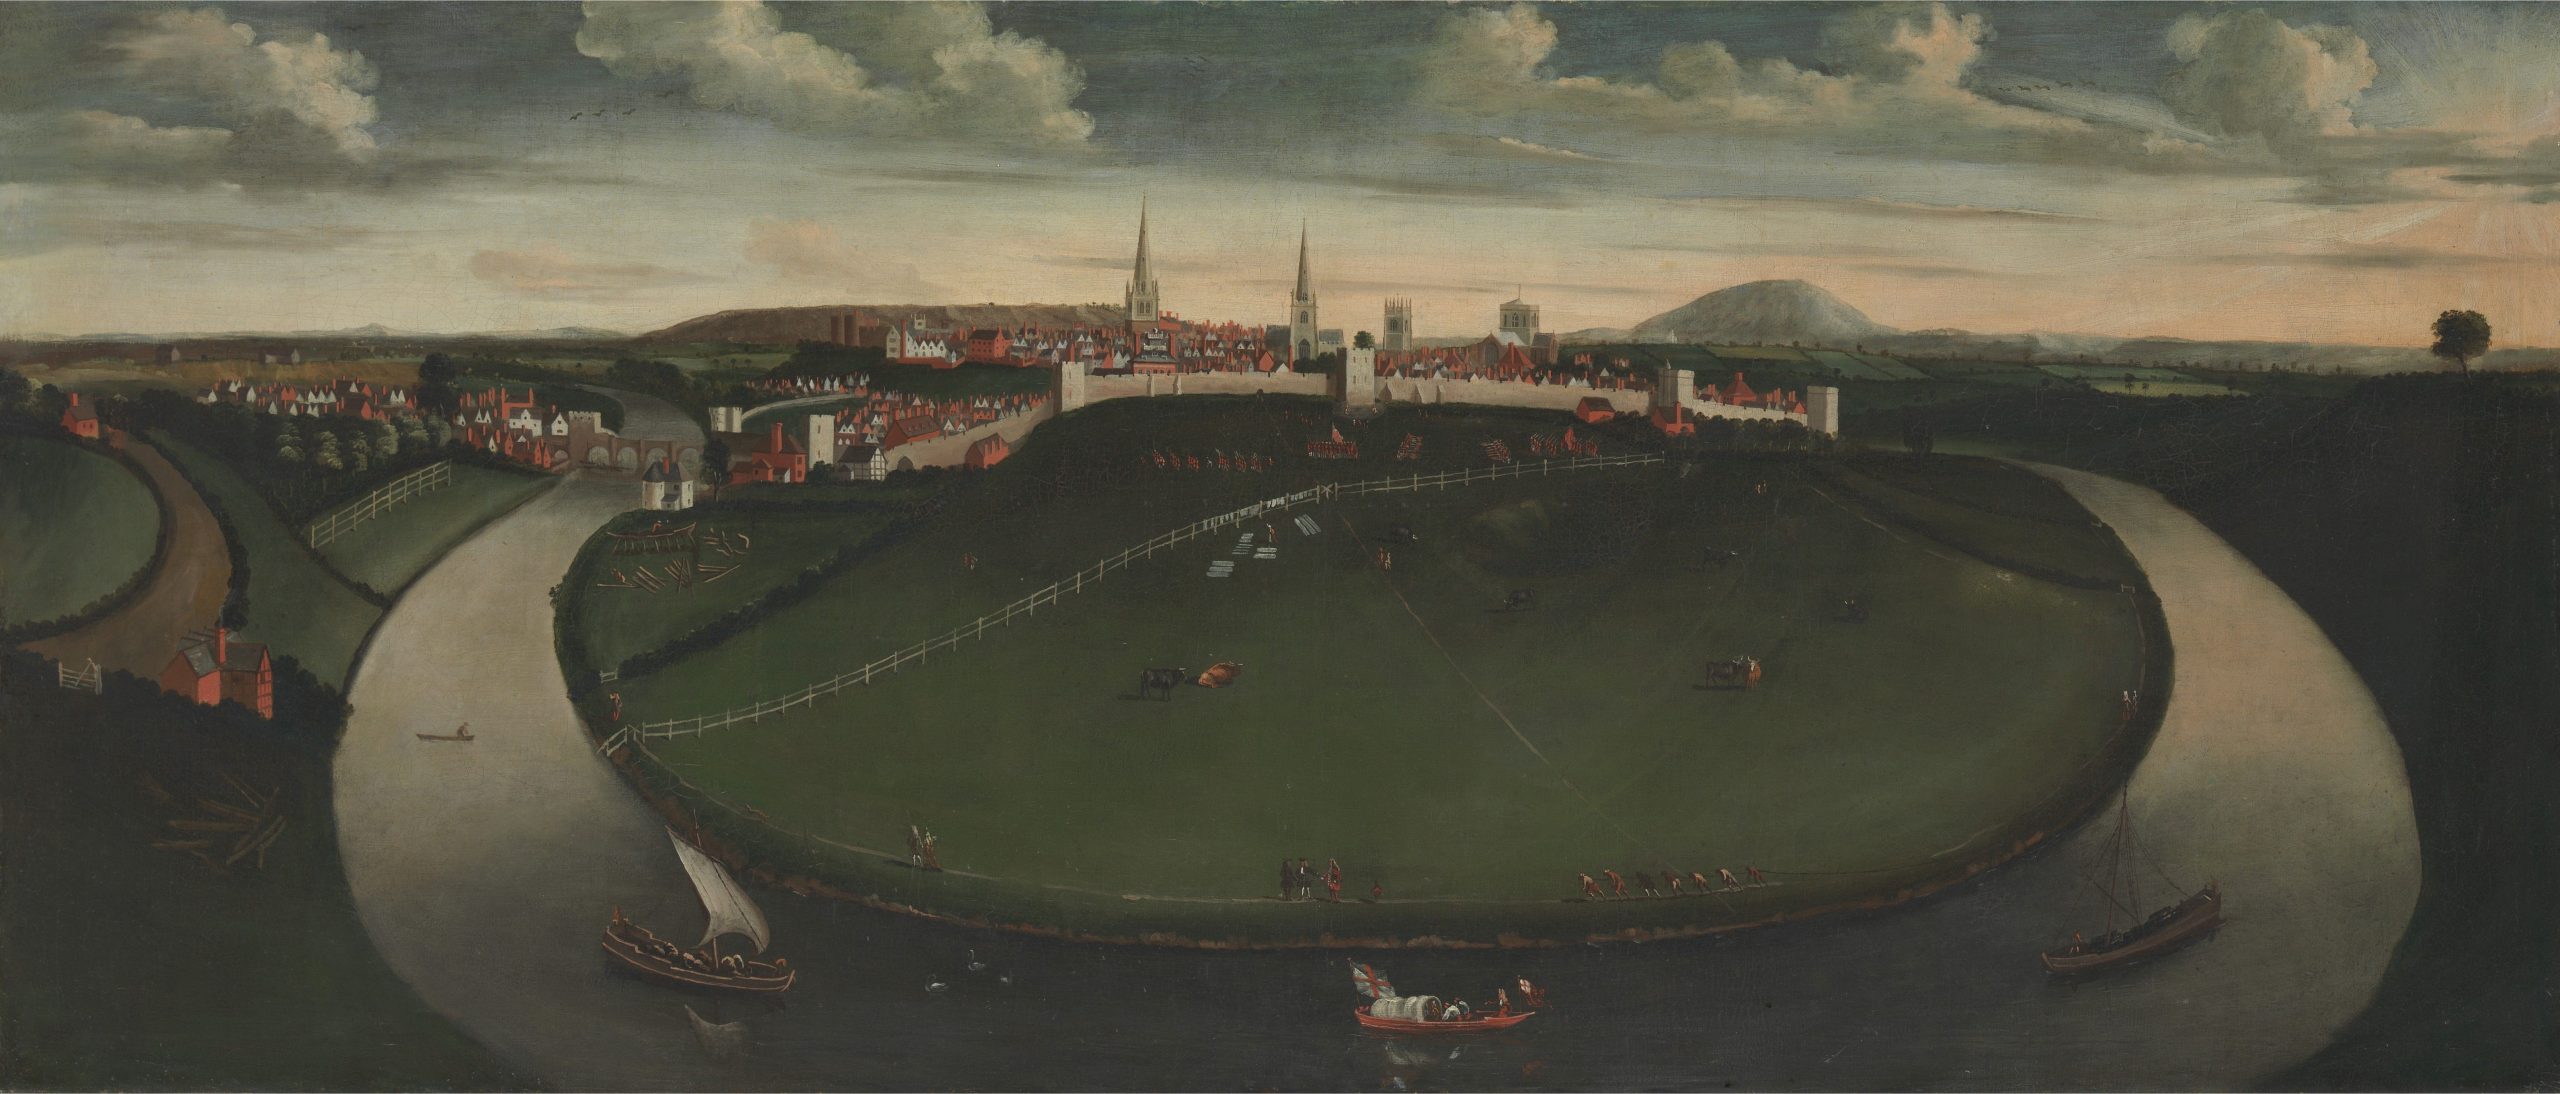 Oil on canvas painting showing Shrewsbury from the southwest. The town is surrounded by walls. The Quarry is an open space outside the walls where cattle graze and soldiers drill.